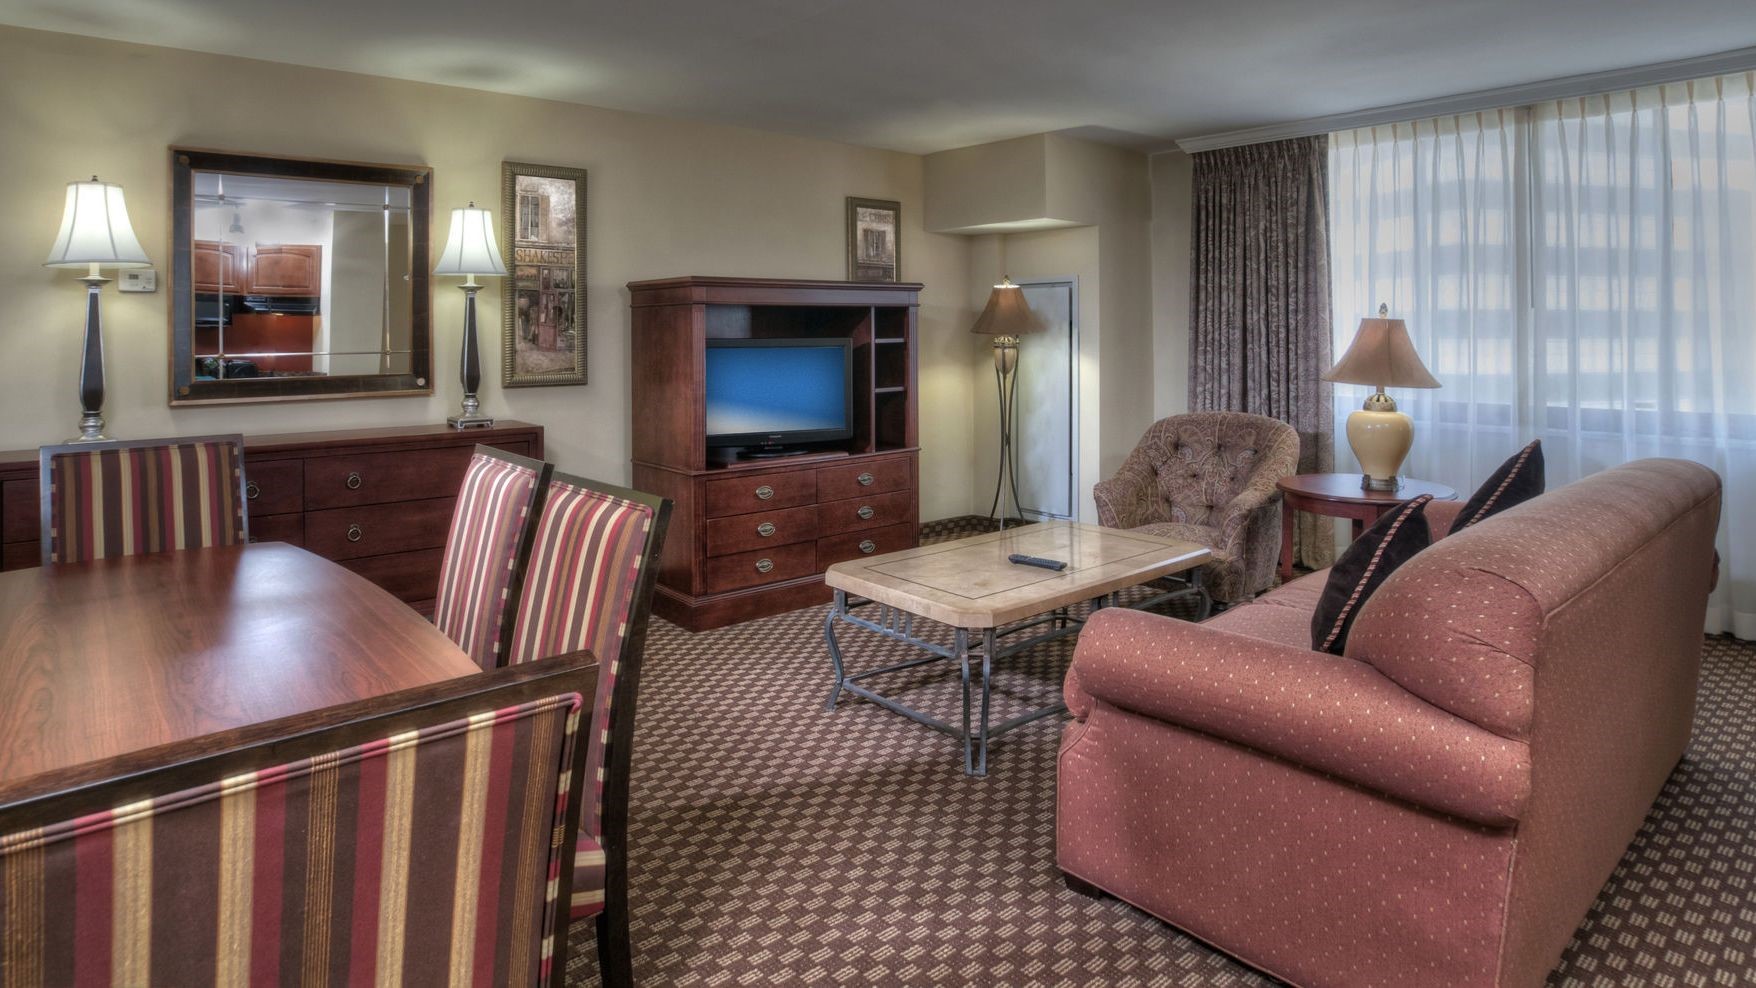 Meeting Rooms at Clarion Collection Arlington Court Suites 1200 N